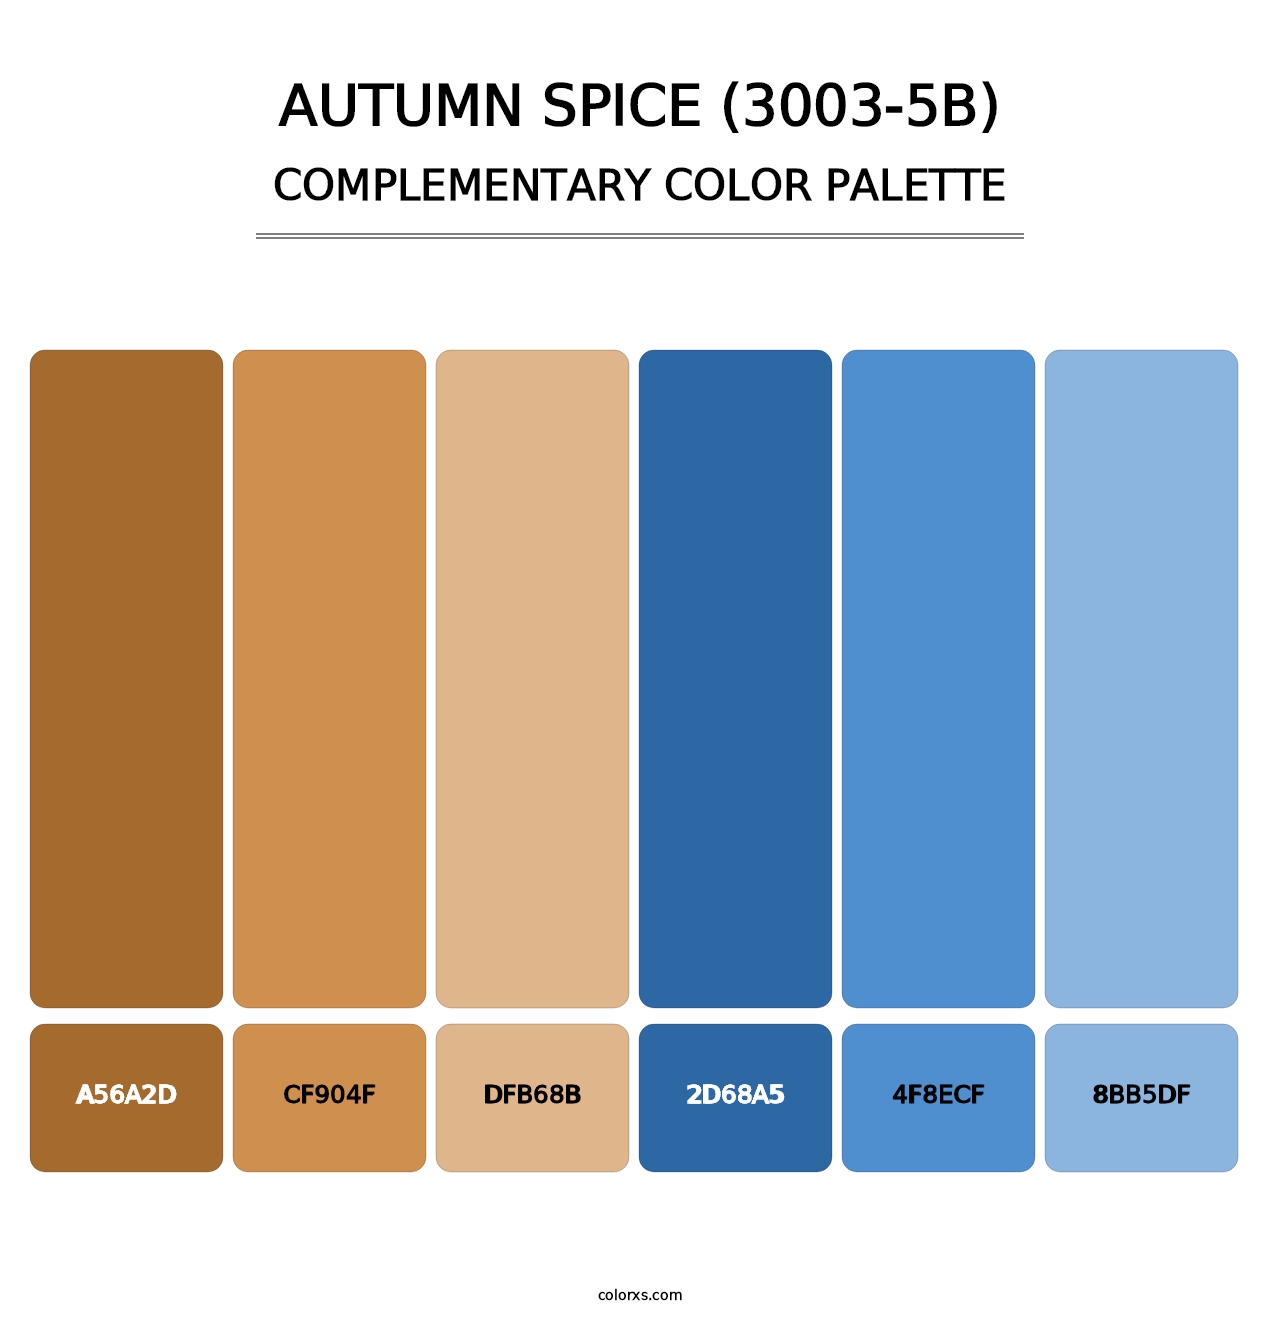 Autumn Spice (3003-5B) - Complementary Color Palette